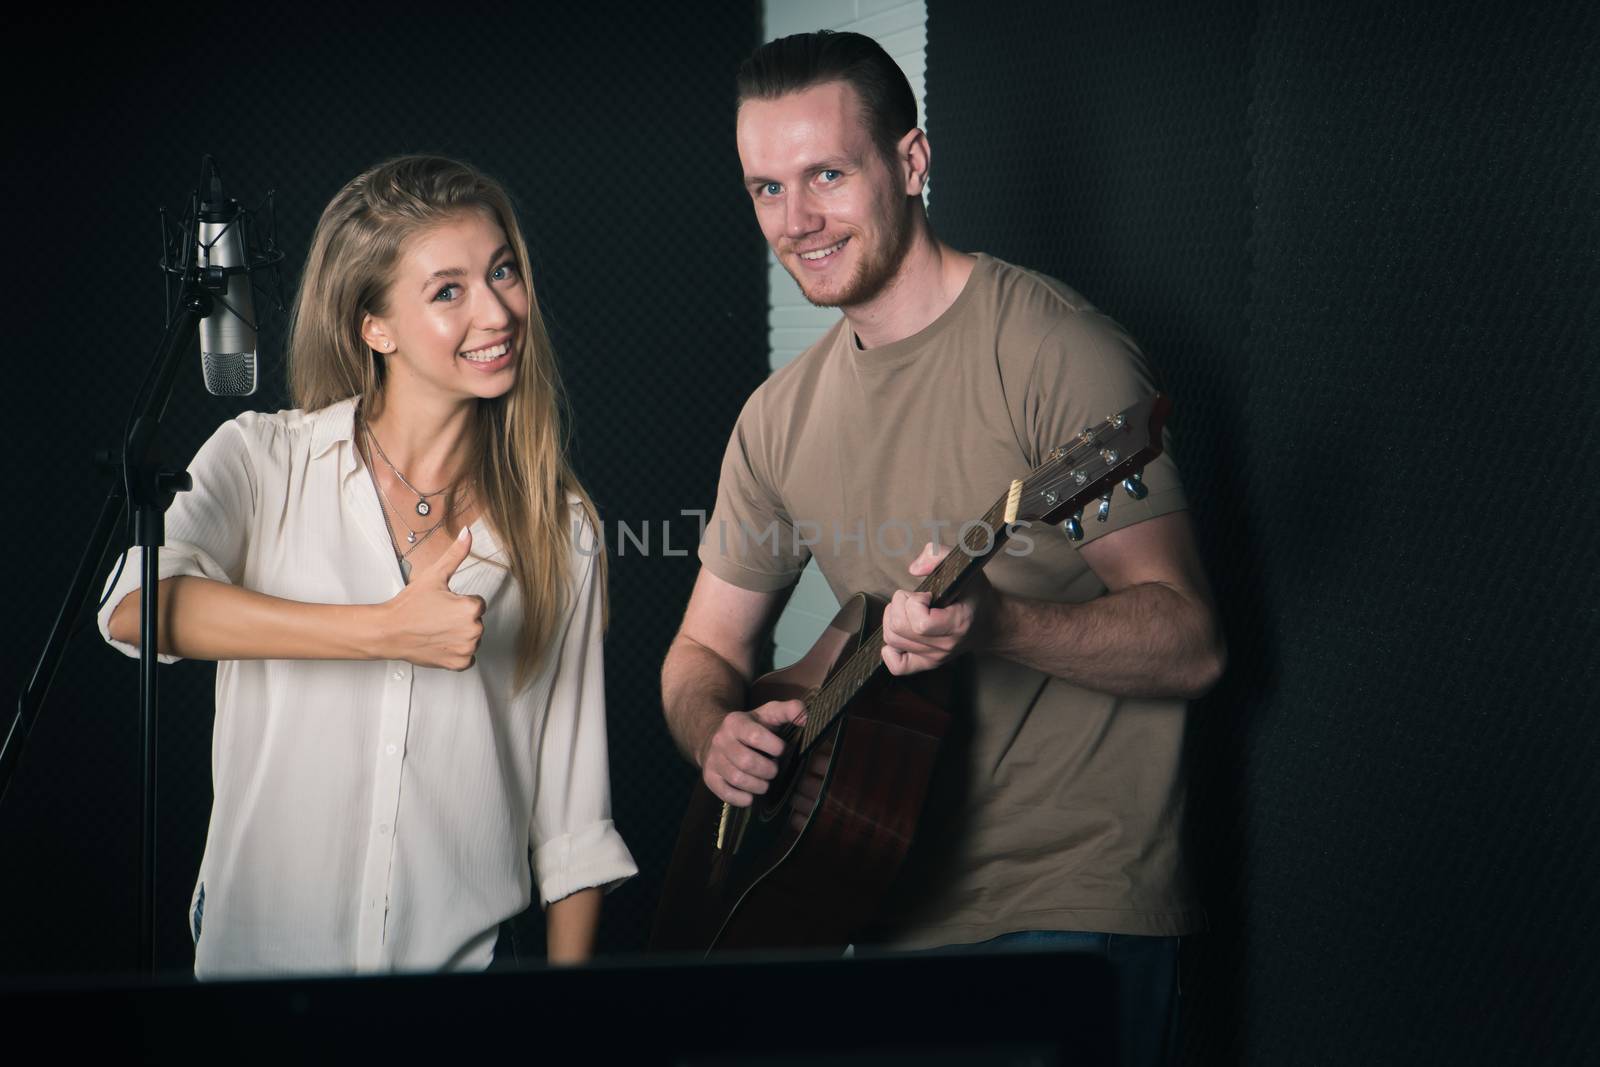 woman singer And man guitarist Caucasian people are practicing and Have fun laughing together in the sound recording studio. concept Artist audition for media, music, and performance produce